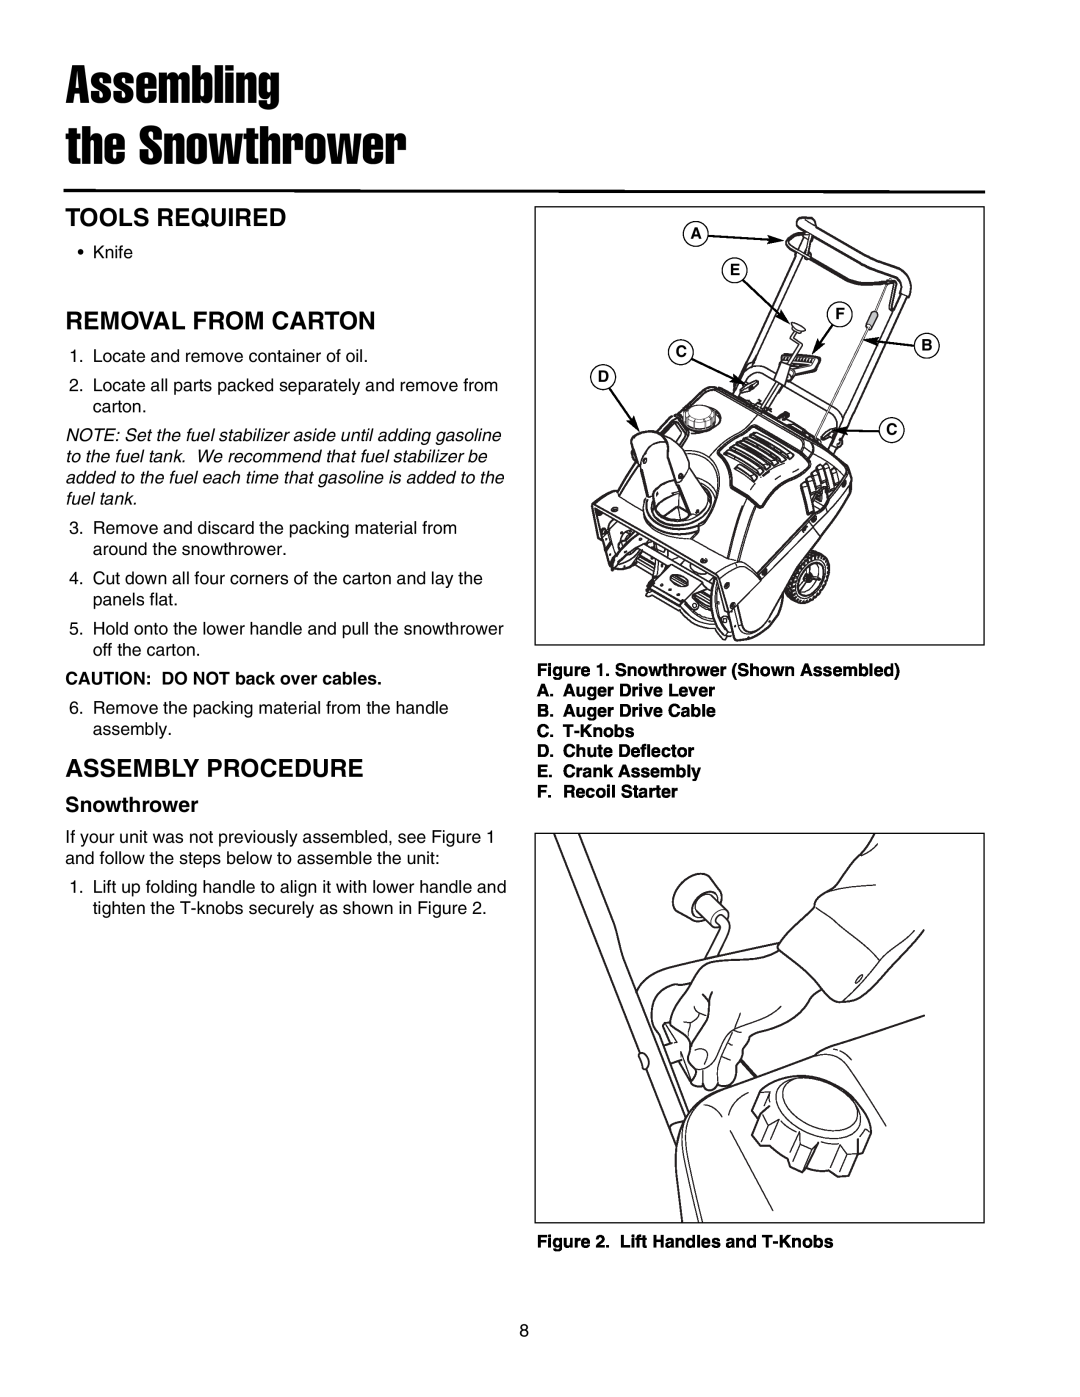 Simplicity 1695514 Assembling the Snowthrower, Tools Required, Removal From Carton, Assembly Procedure, F.Recoil Starter 